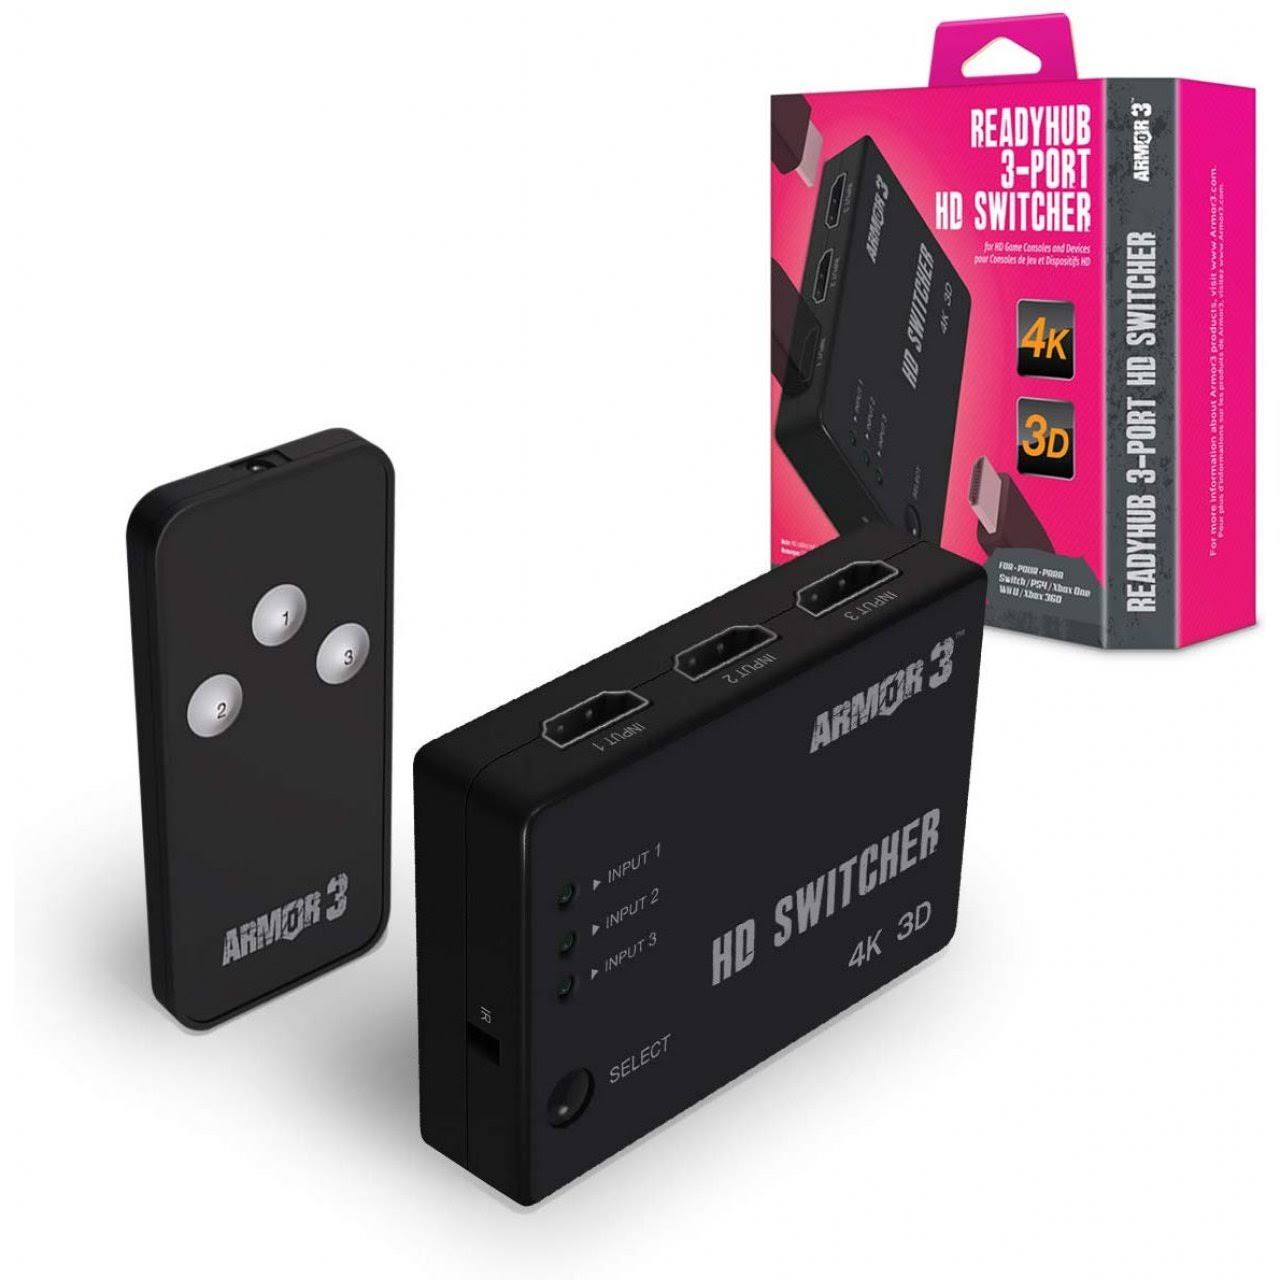 Armor3 ReadyHub 3-Port HD Switcher for HD Game Consoles and Devices